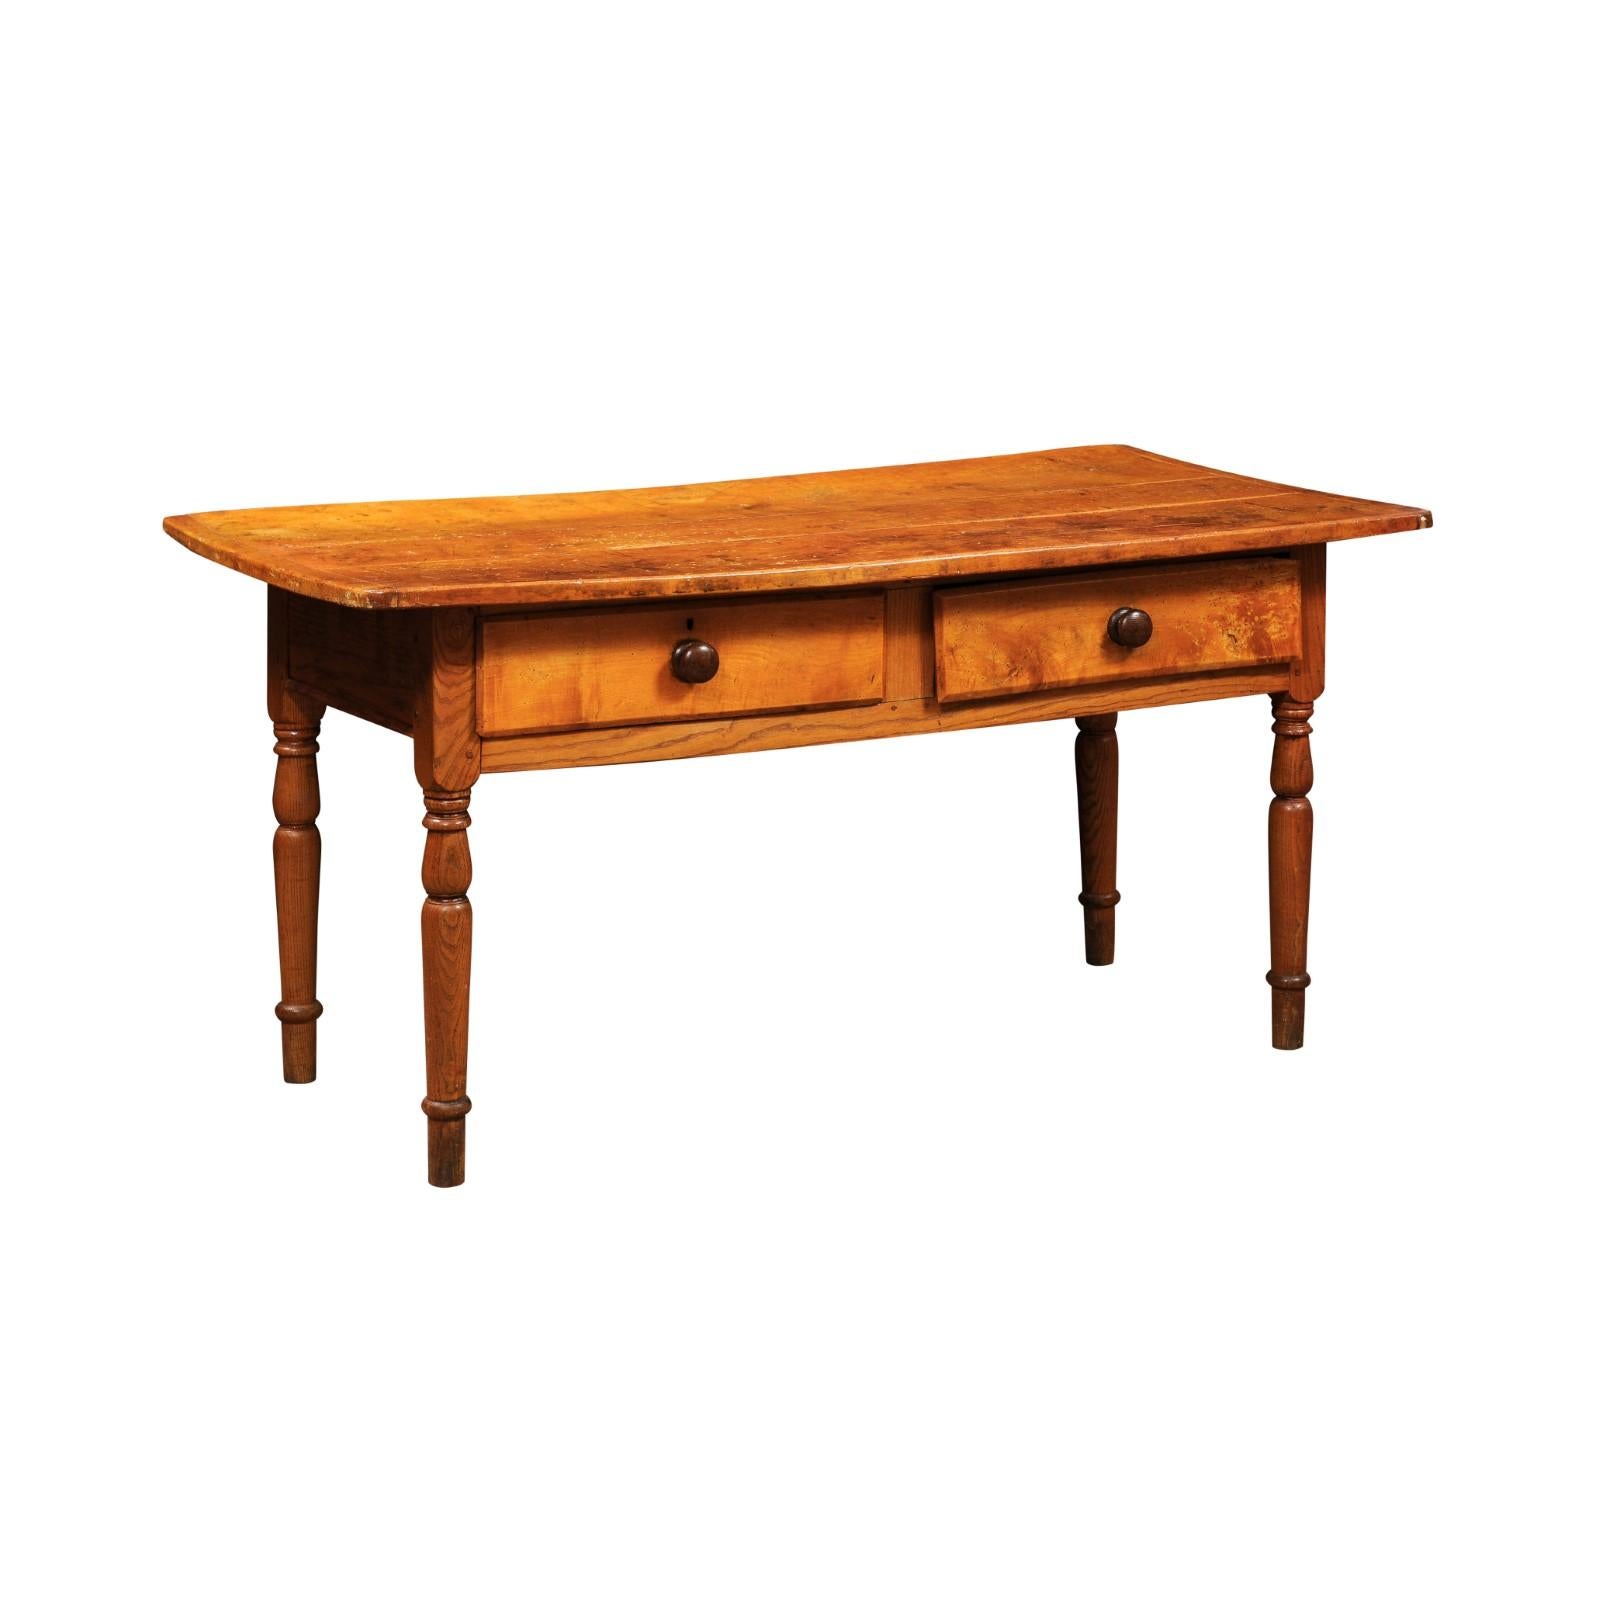 Large American Pine Kitchen Table with 2 Deep Drawers and Turned Legs, c1890 For Sale 9